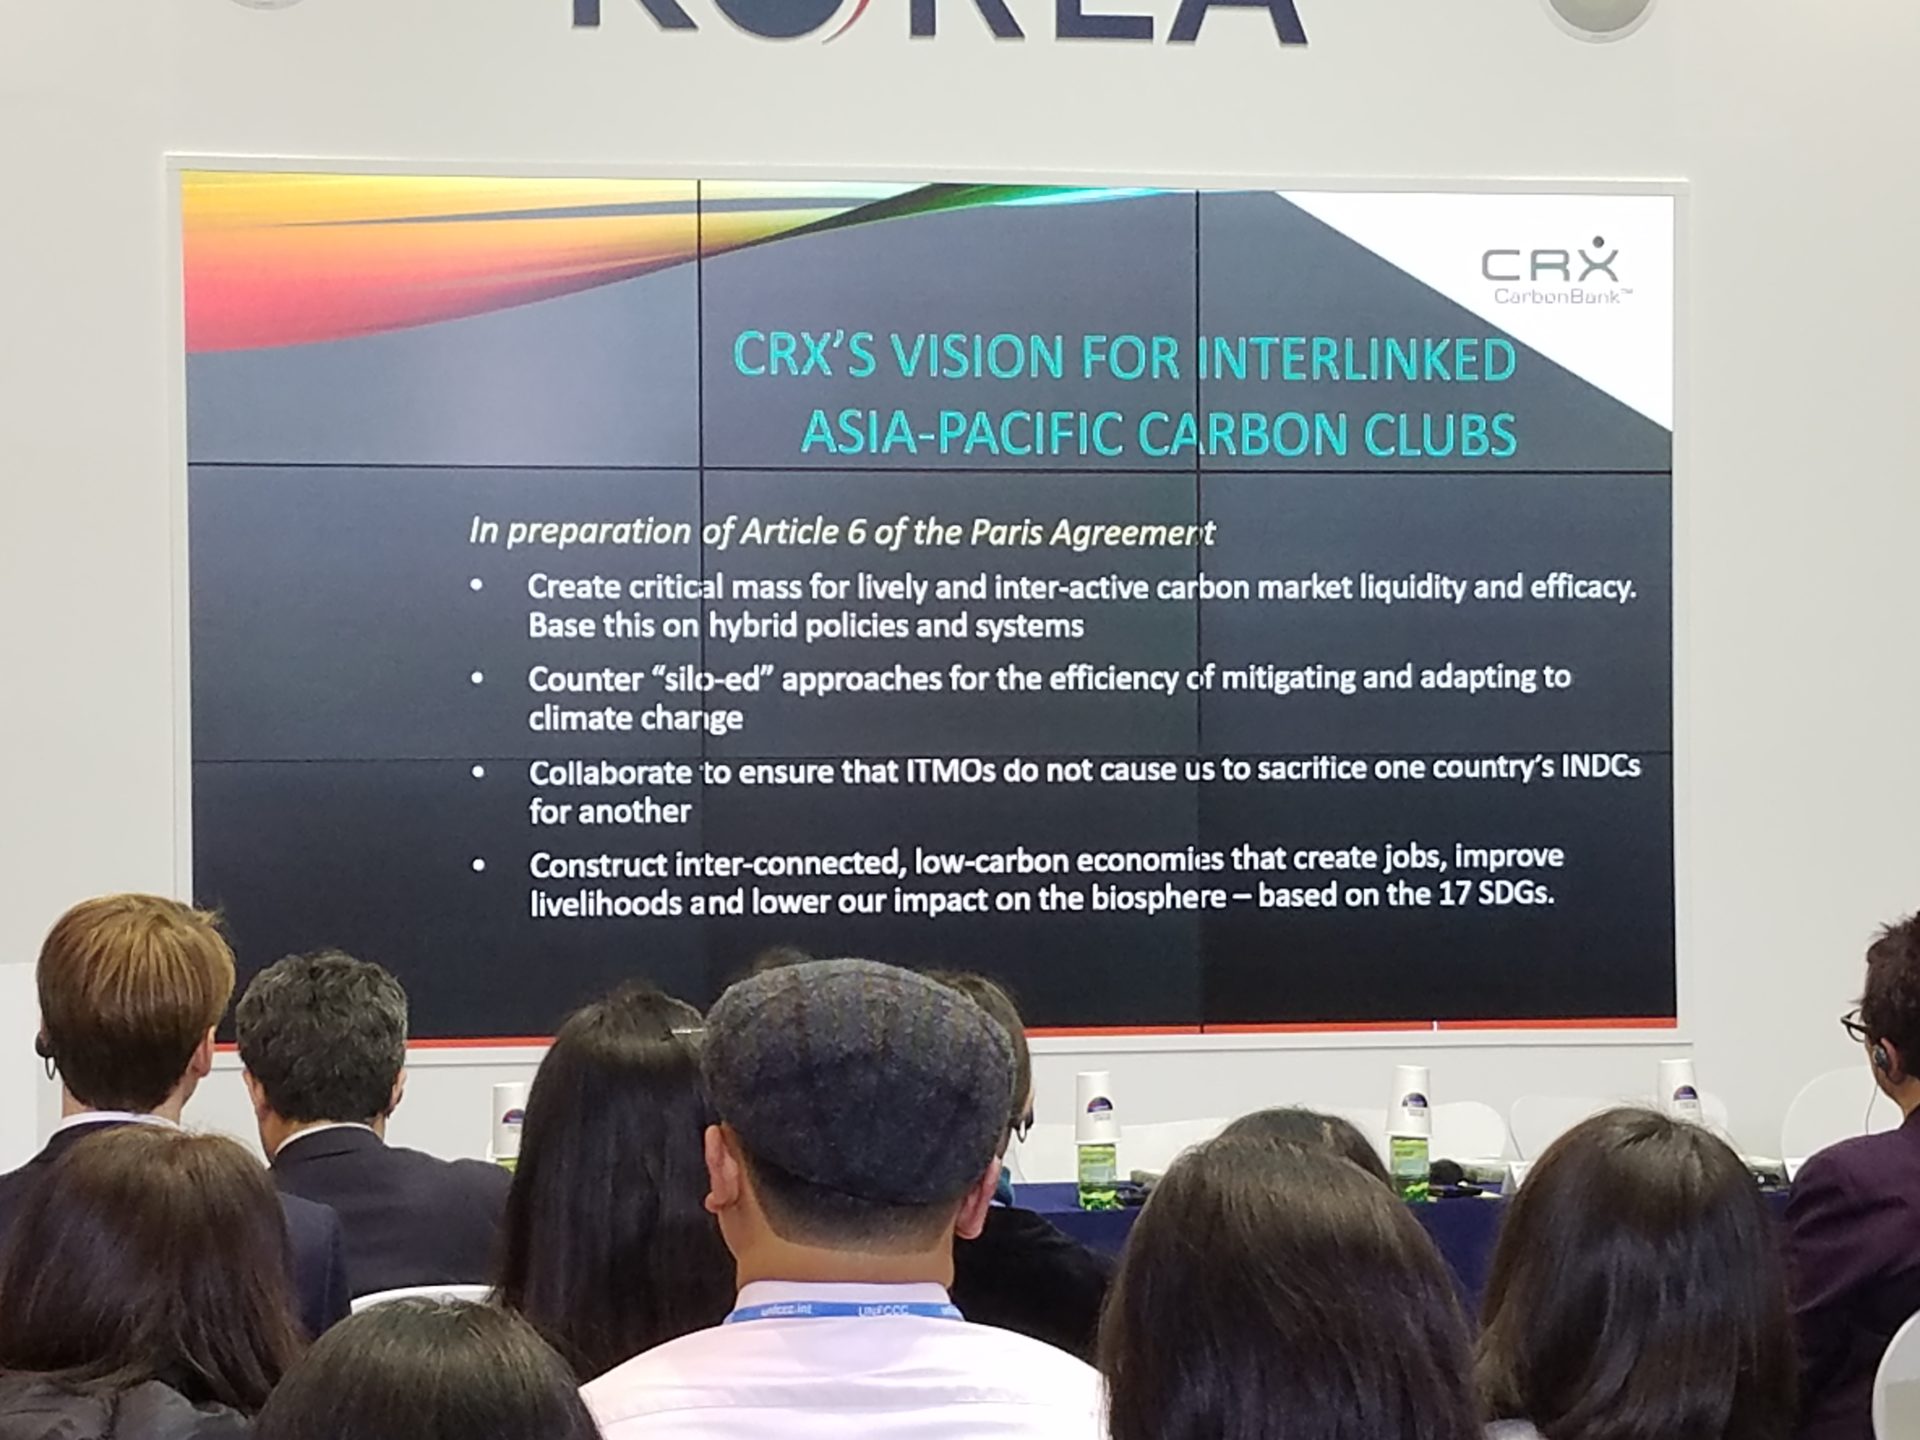 discussion of carbon markets in Asia